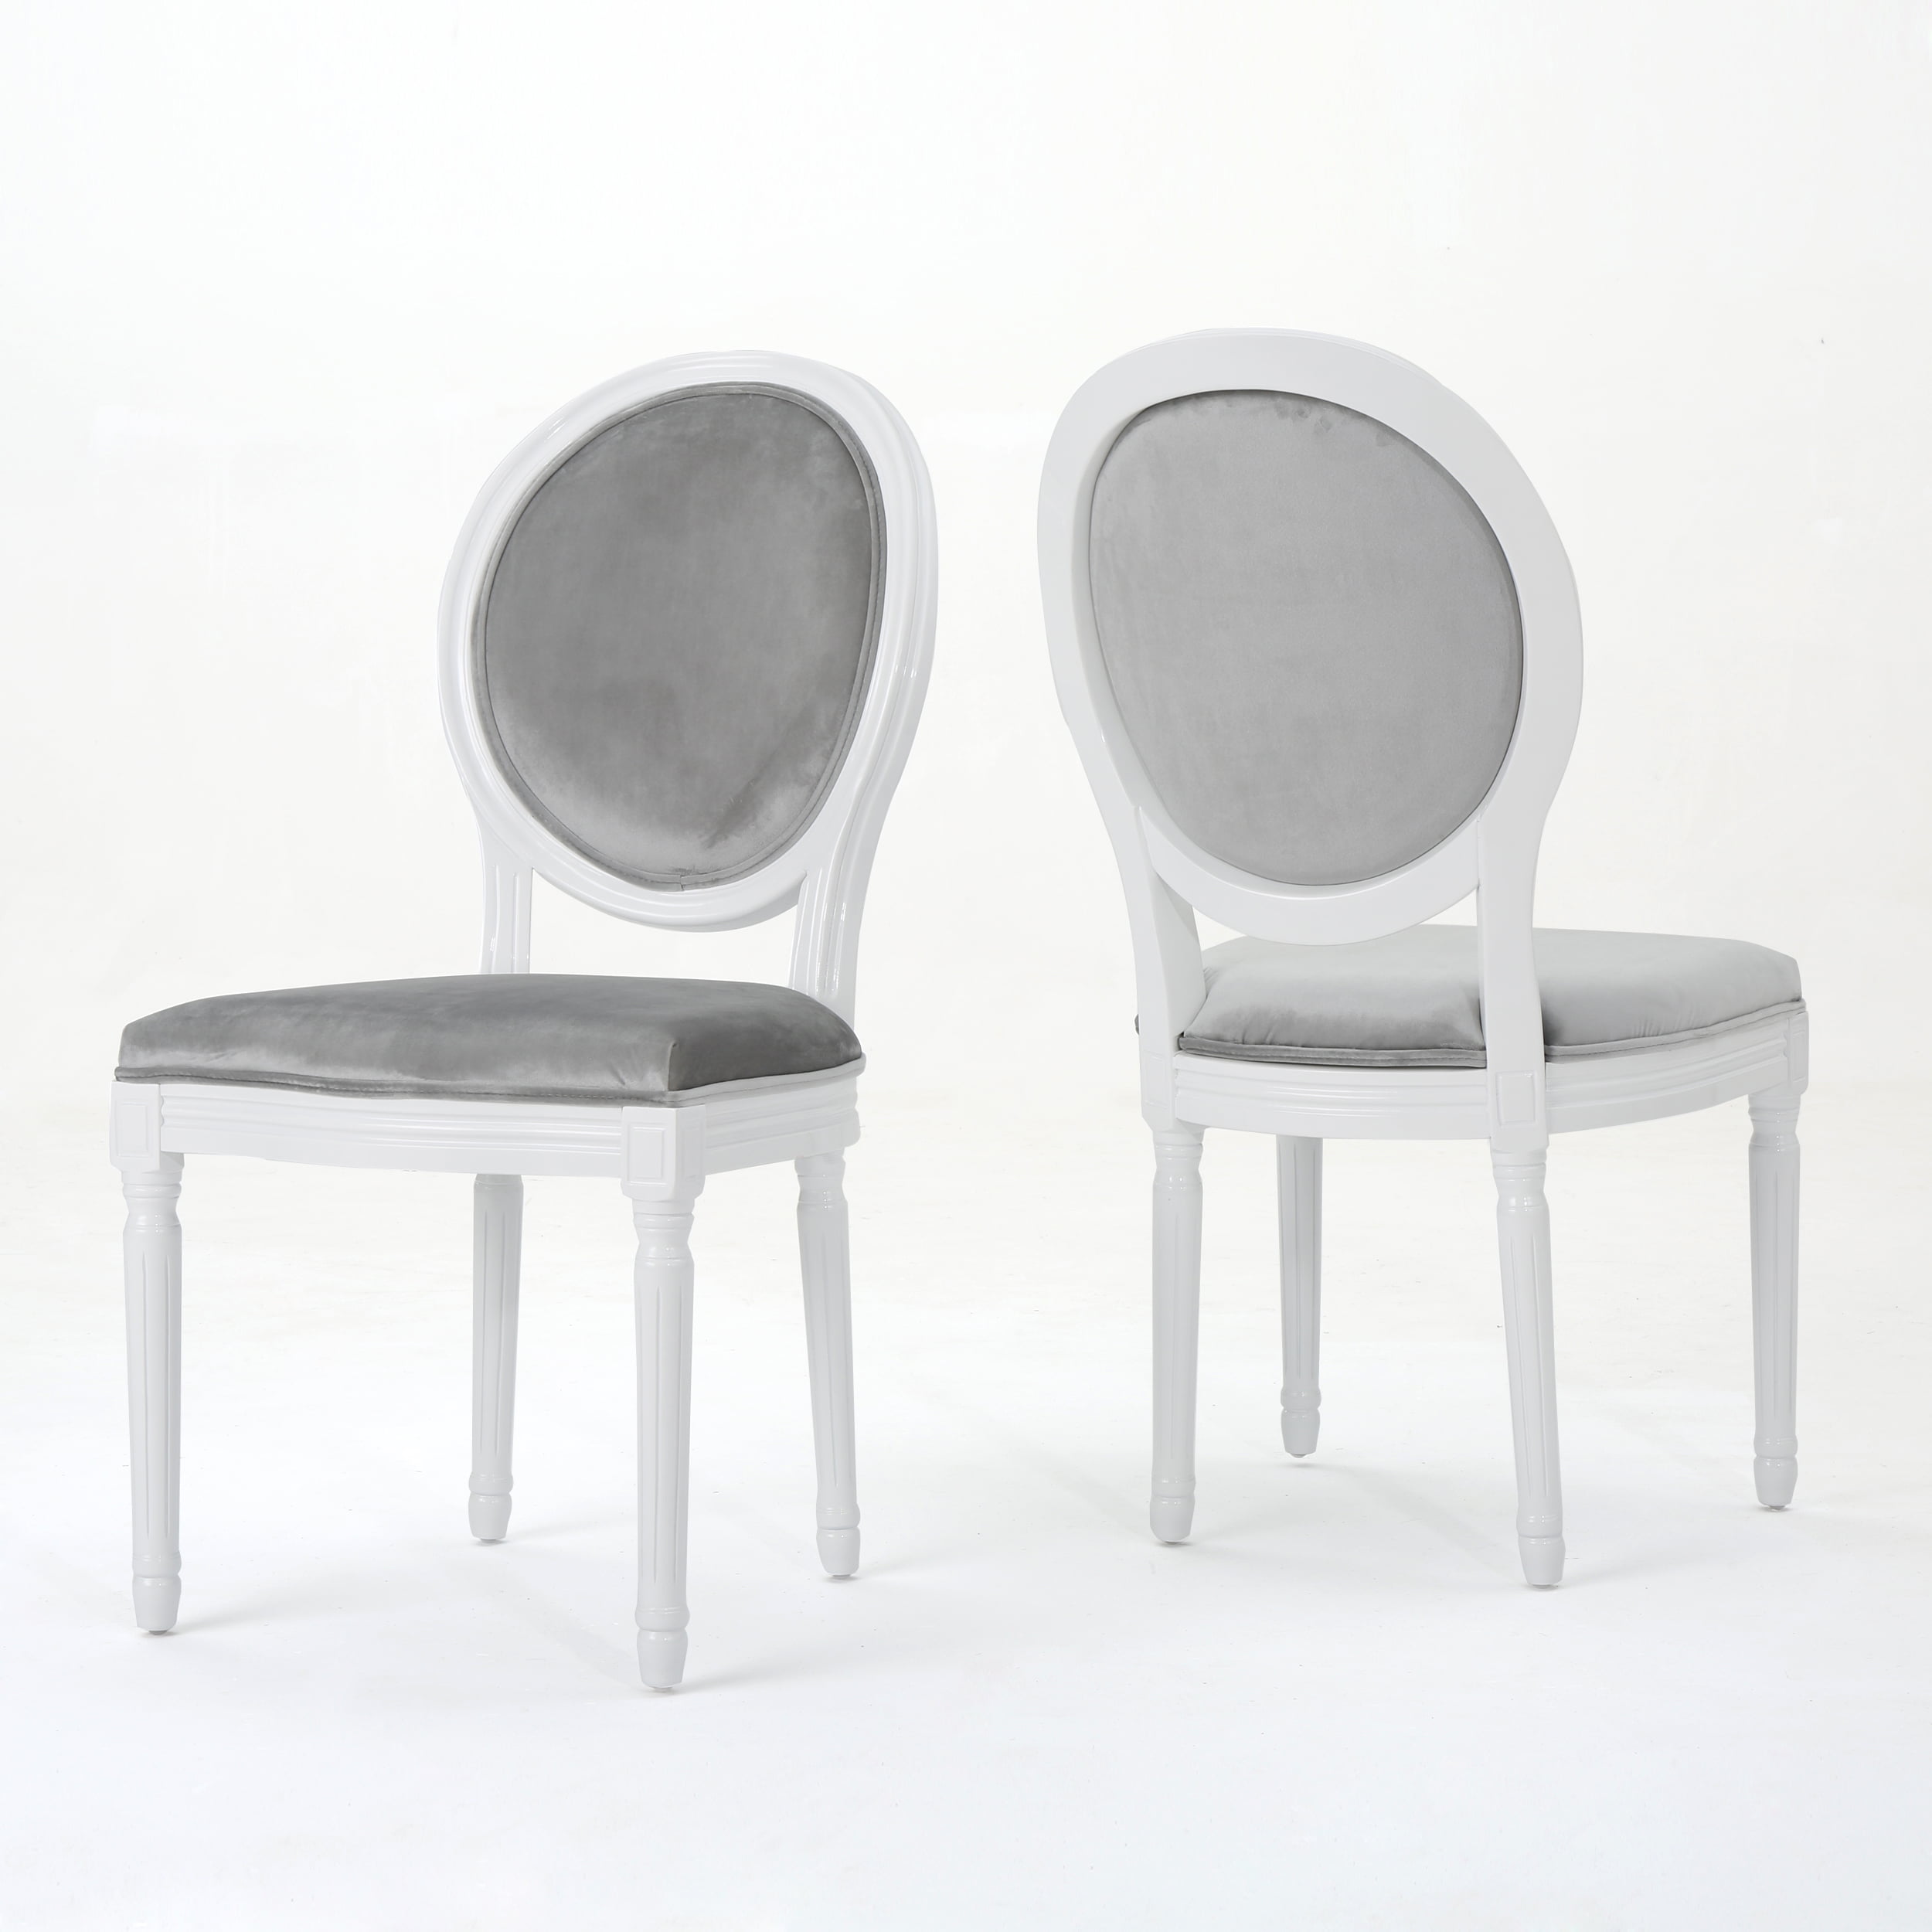 Phinnaeus Contemporary Velvet Dining Chairs (Set of 2), Light Gray and